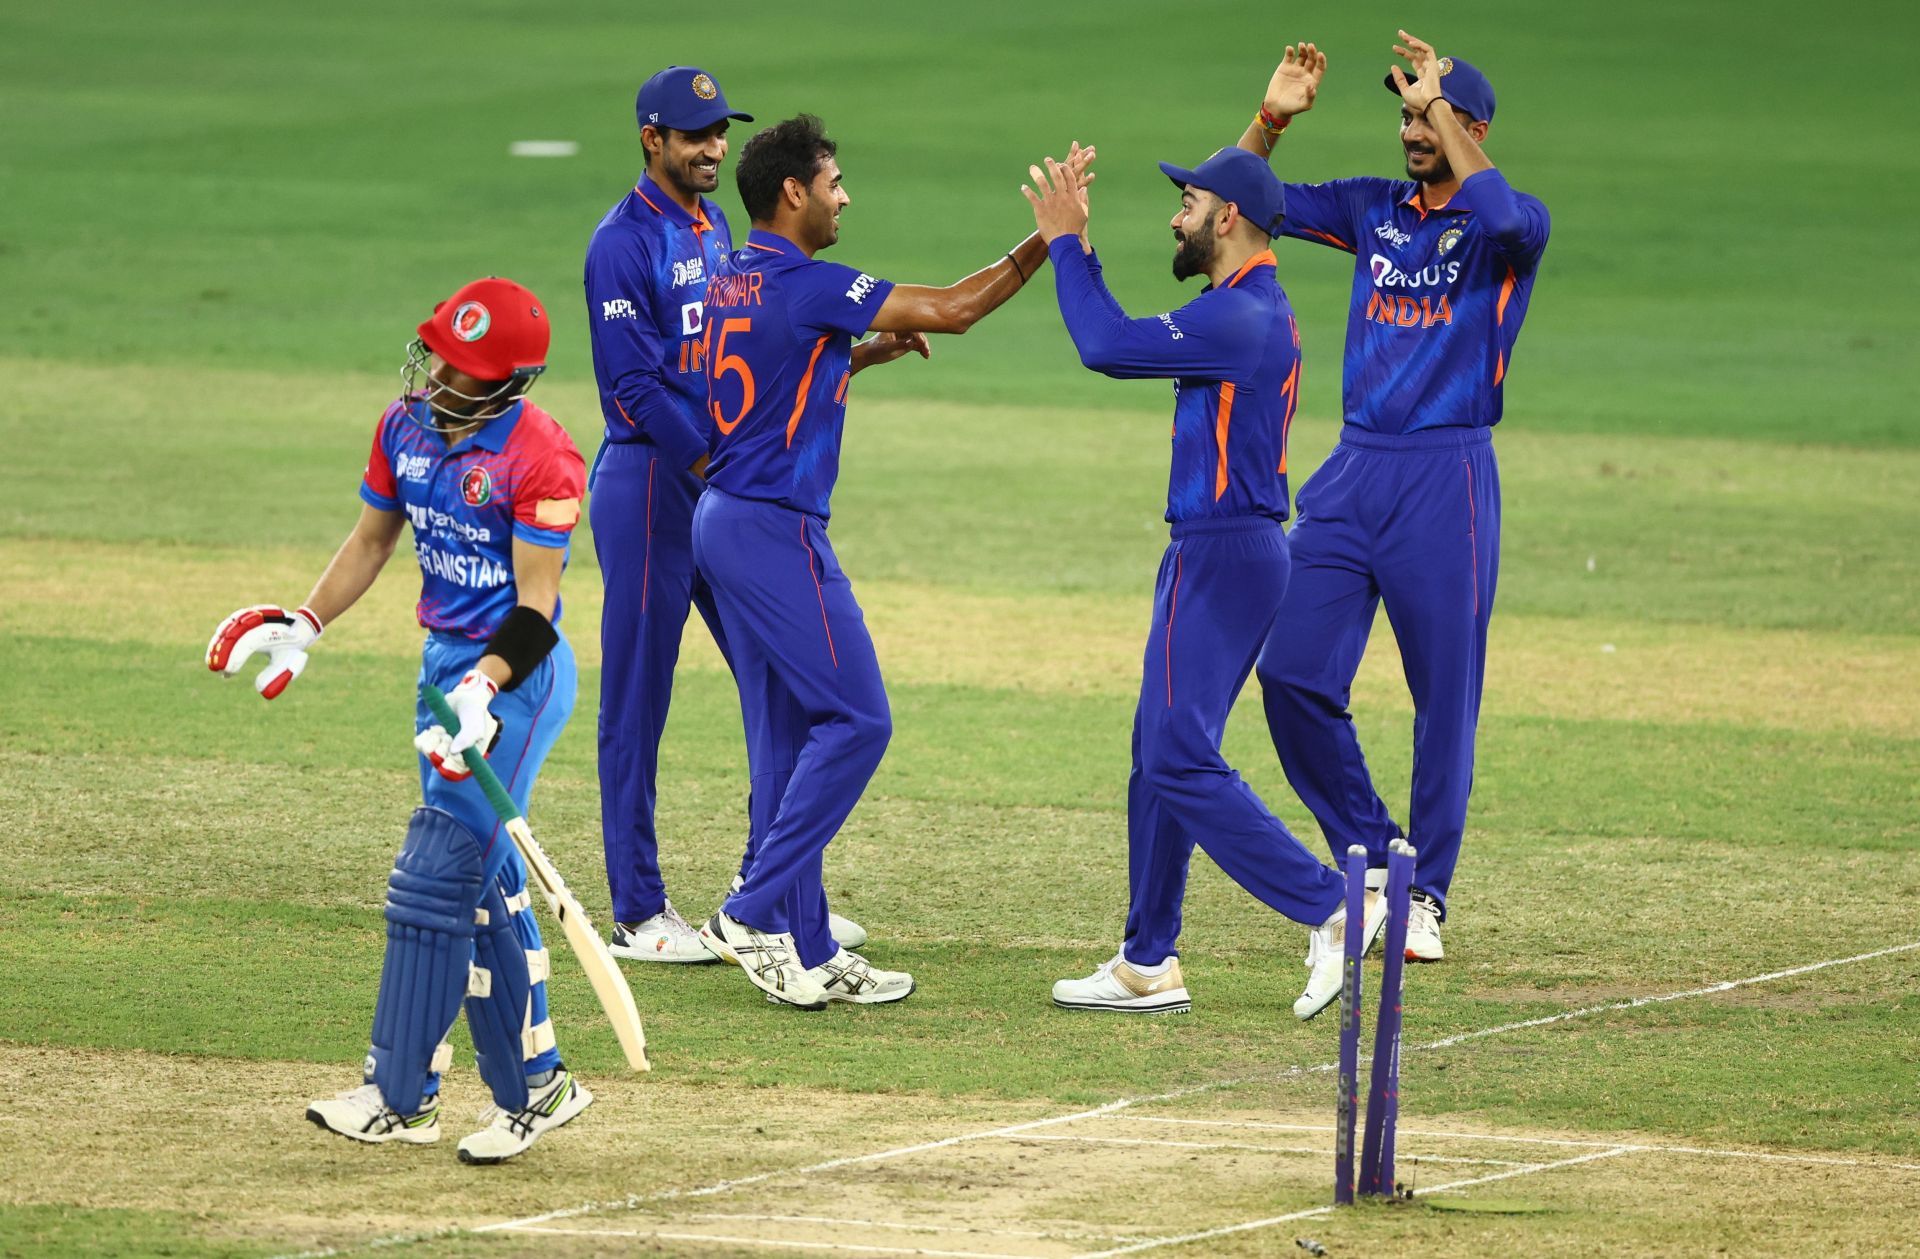 Bhuvneshwar Kumar dismantled the Afghanistan top order in Asia Cup 2022. (Image: Getty)